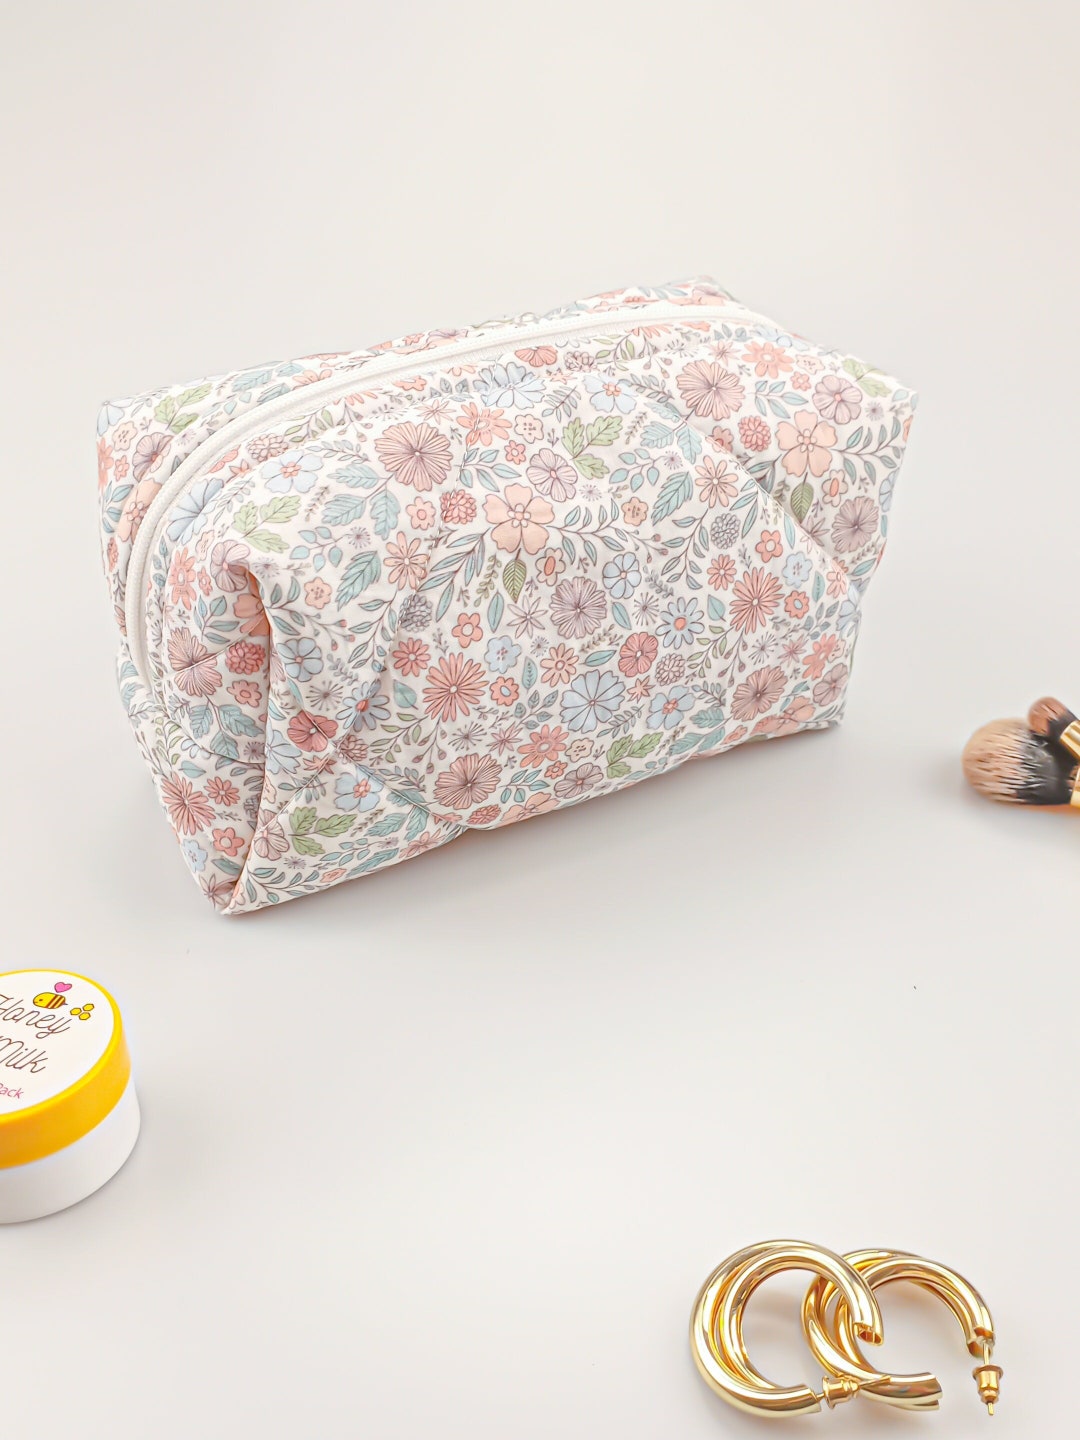 Floral Makeup Bag Quilted Cotton Cosmetic Bag Toiletry Bag - Etsy